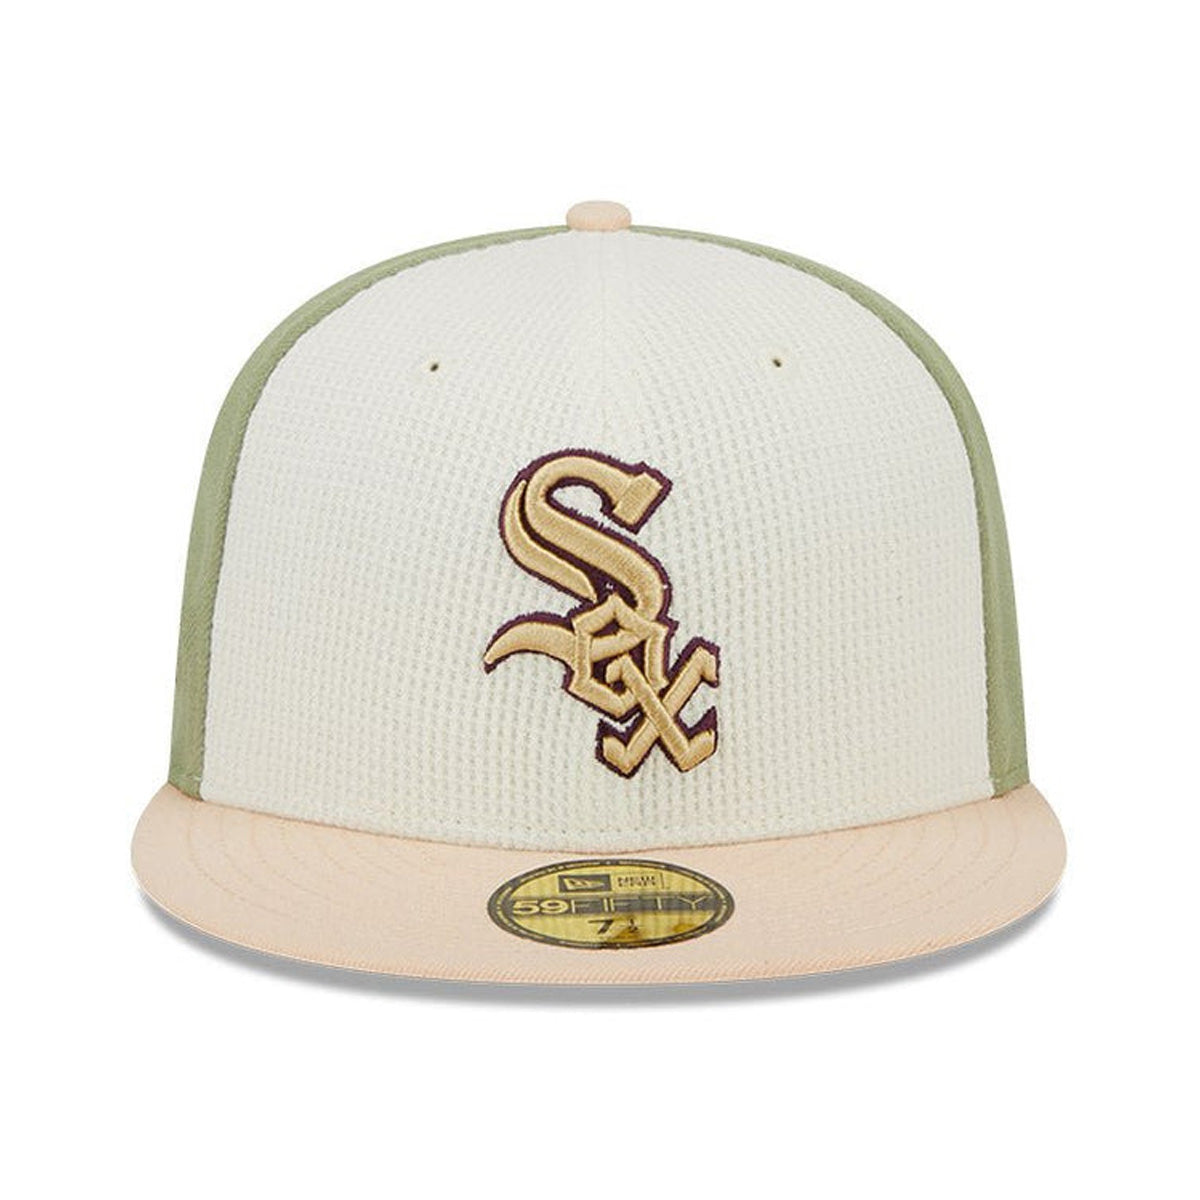 NEW ERA 芝加哥白襪 - 59FIFTY 熱鋒 WS05 WH/P.GRE/P.BEI [14132556]